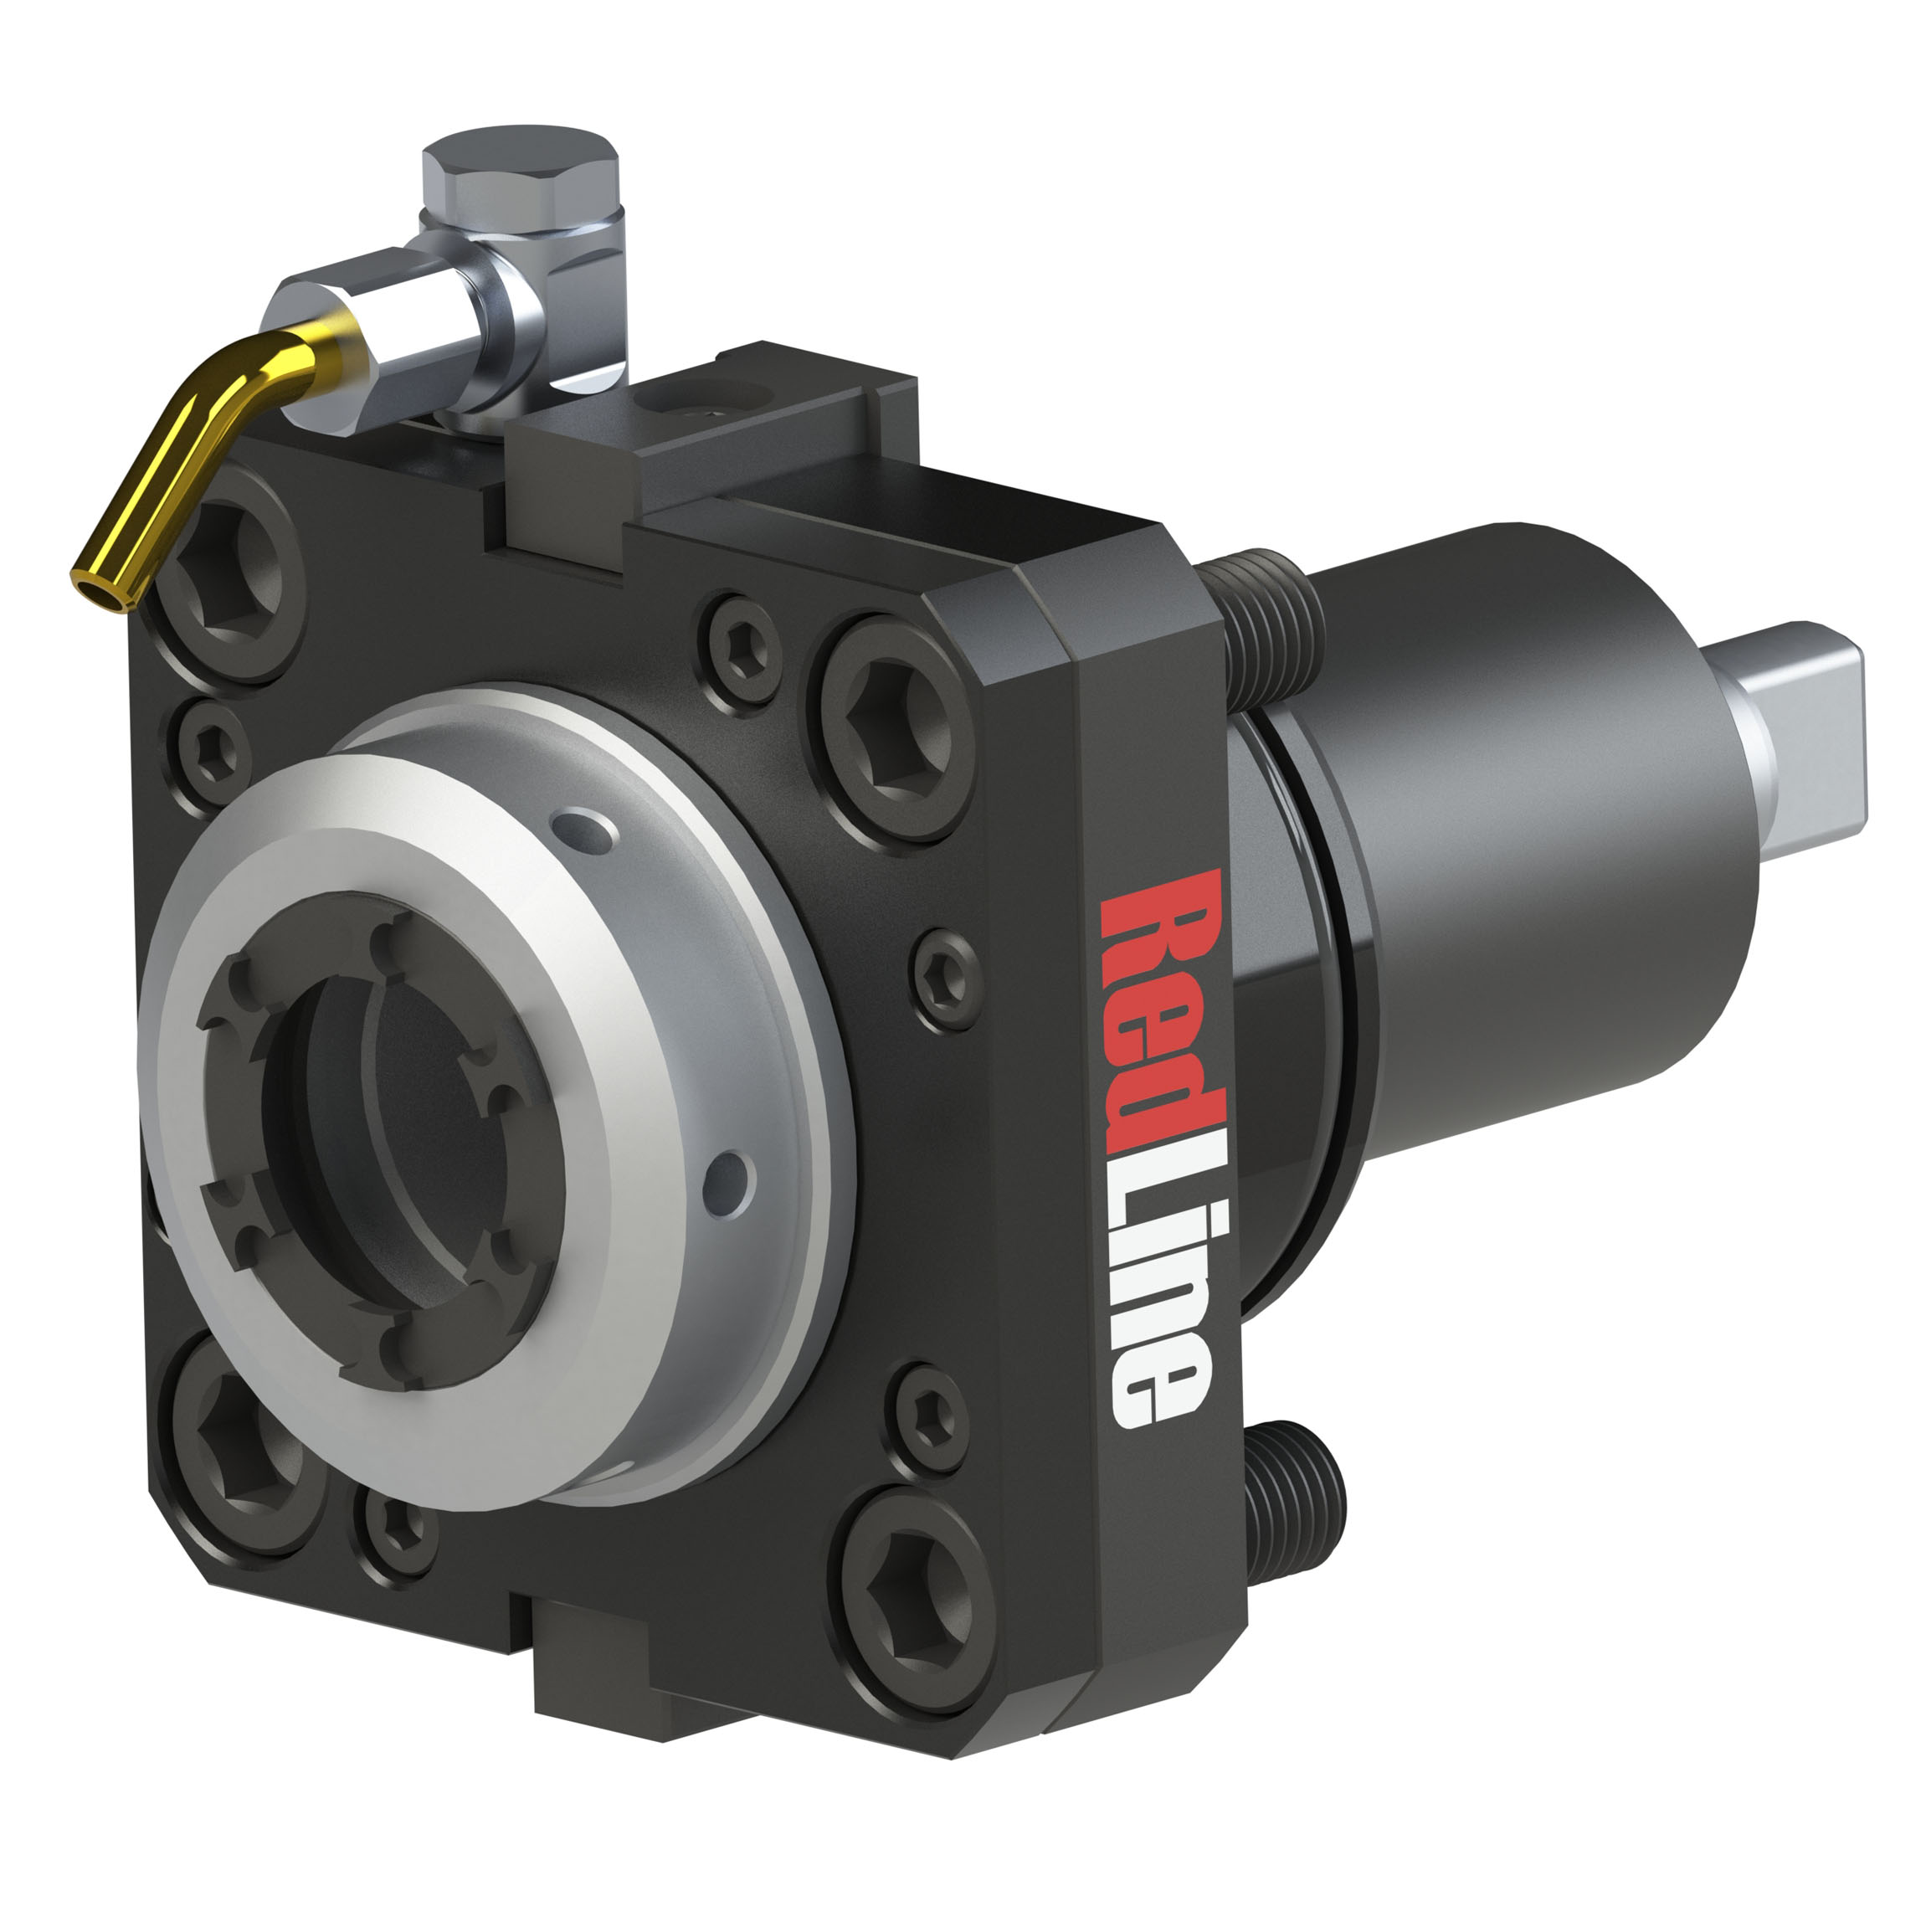 The BMT65 Axial live tool with an ER32 internal collet nut.